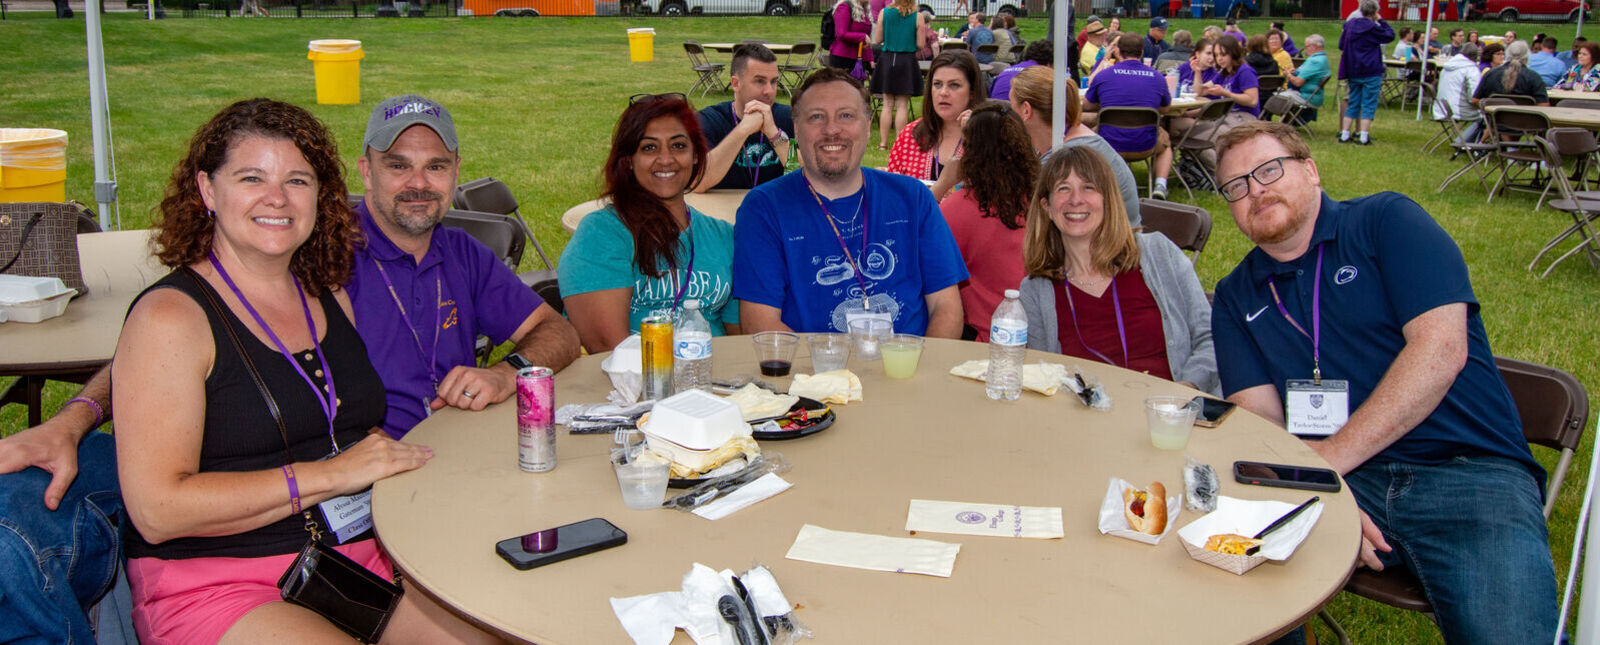 A group of alumni smile while sitting around a table outside during Reunion